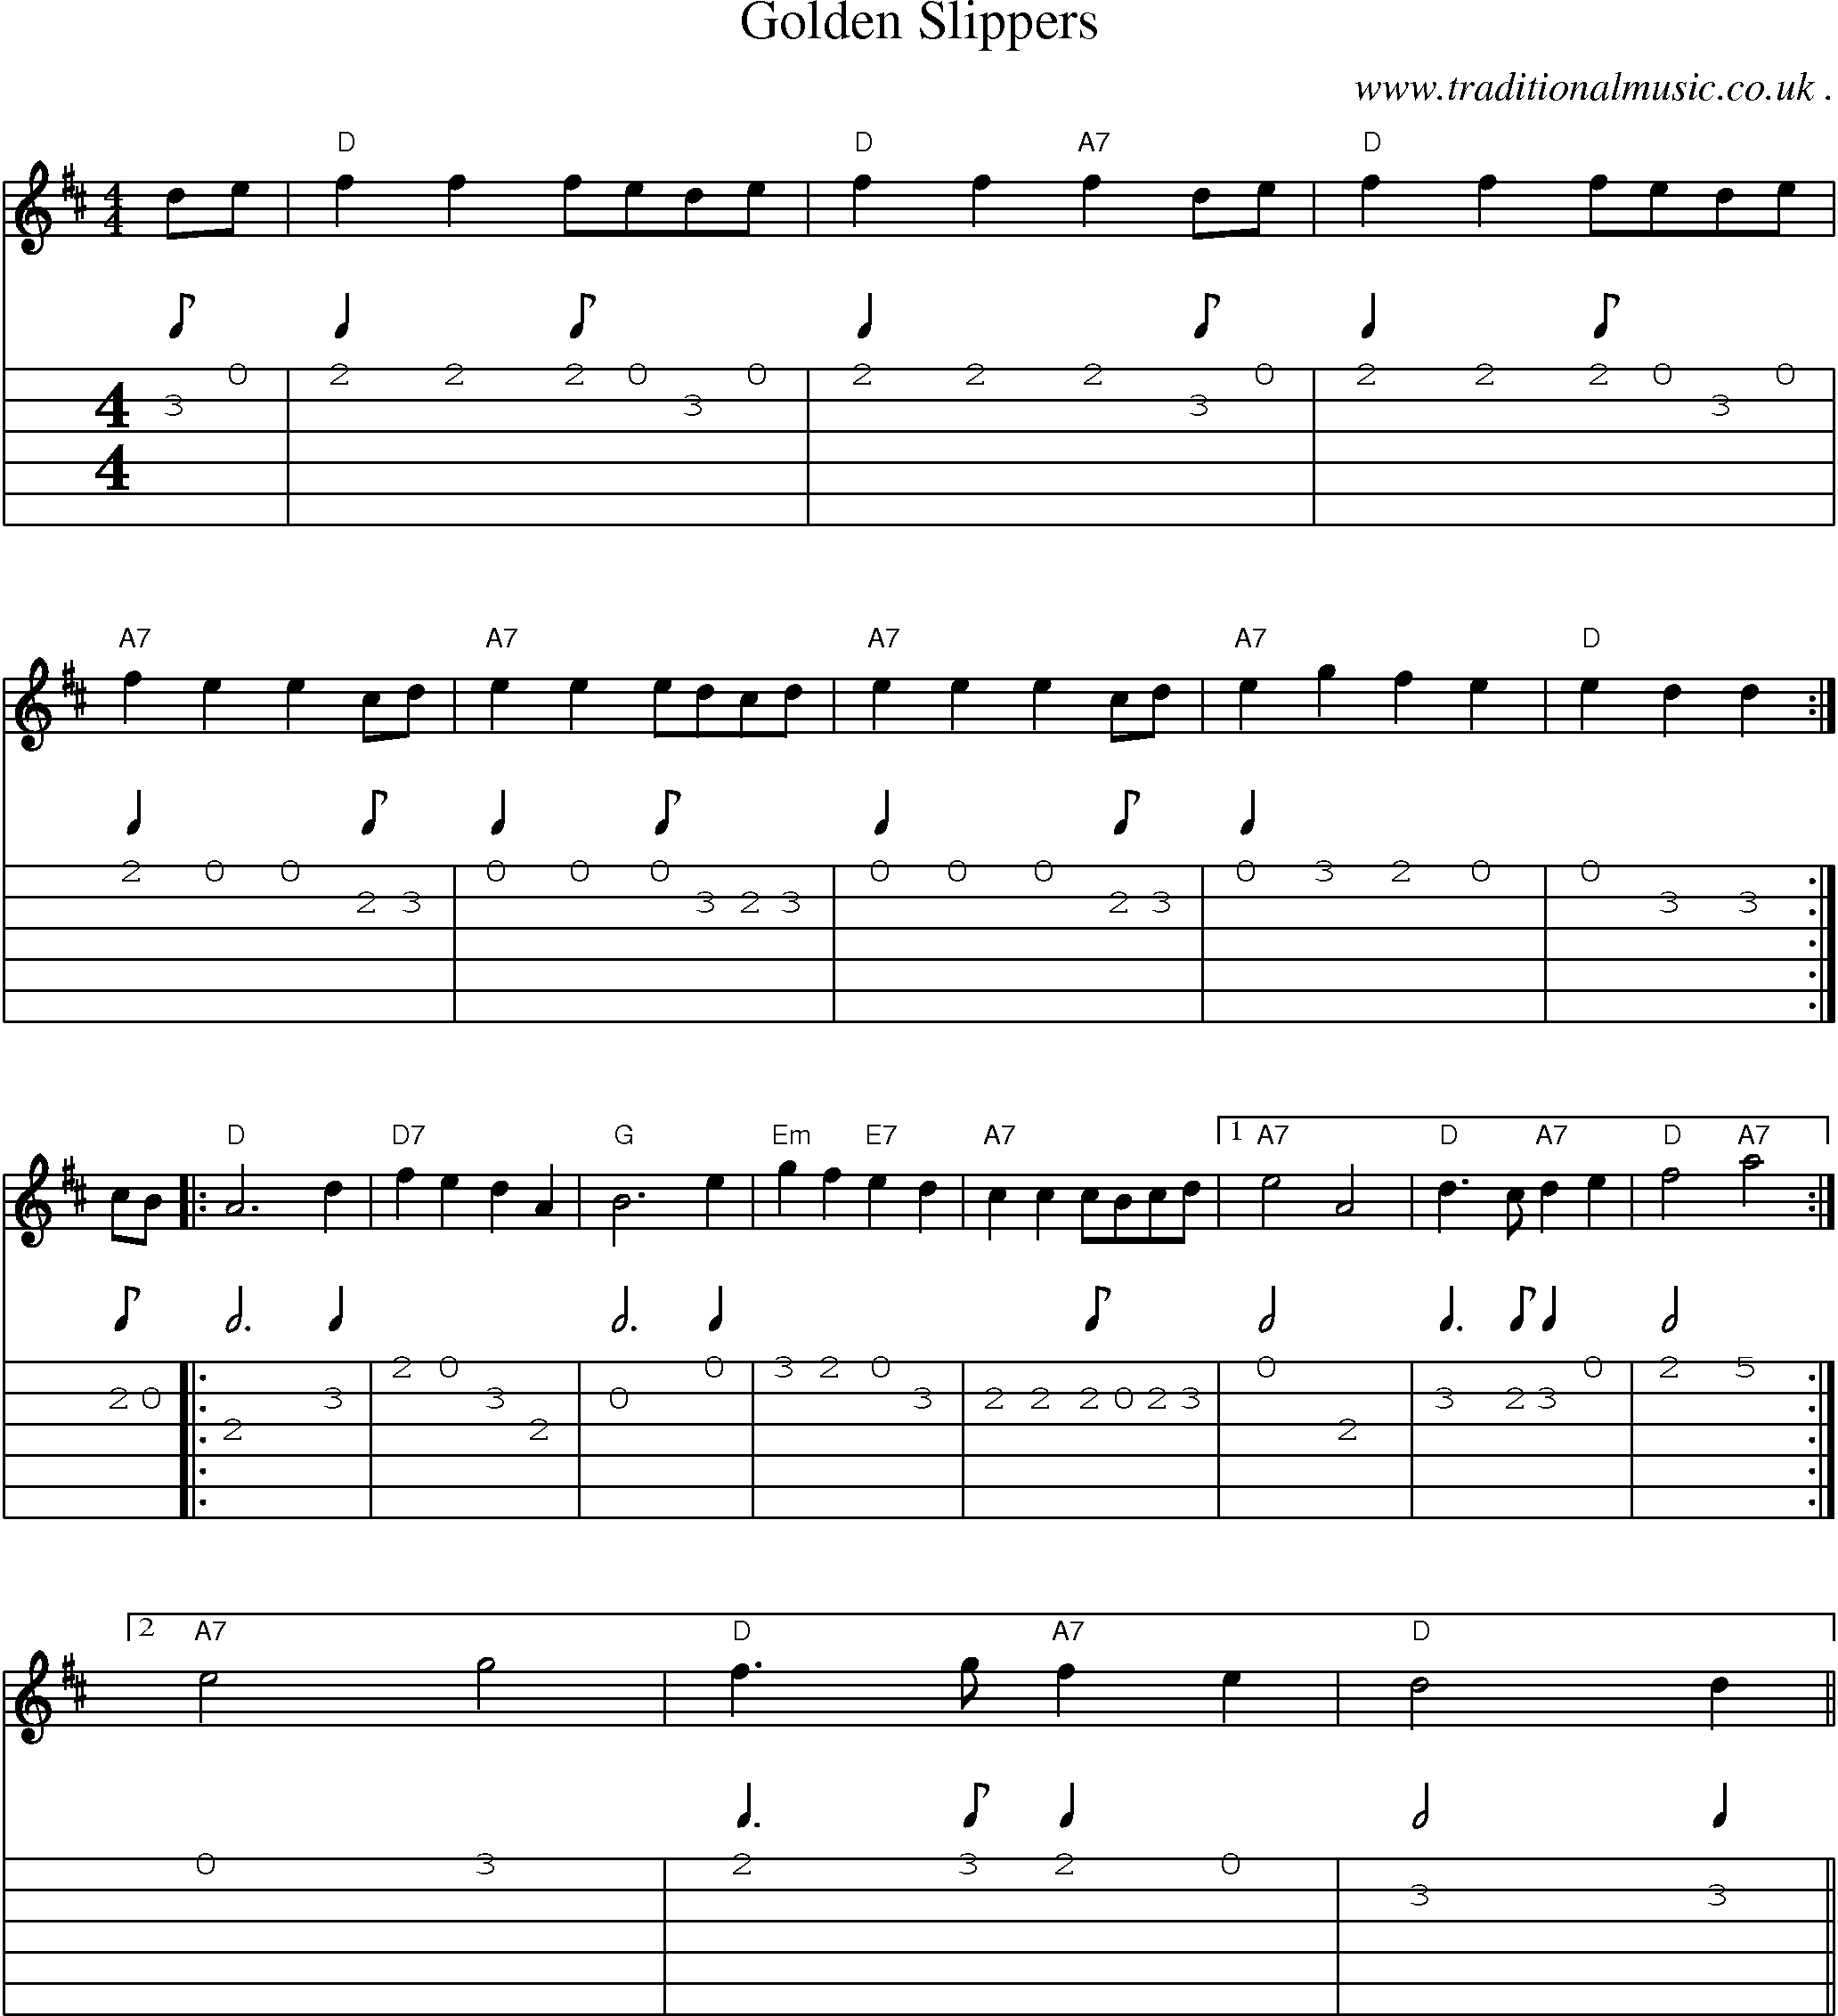 Music Score and Guitar Tabs for Golden Slippers